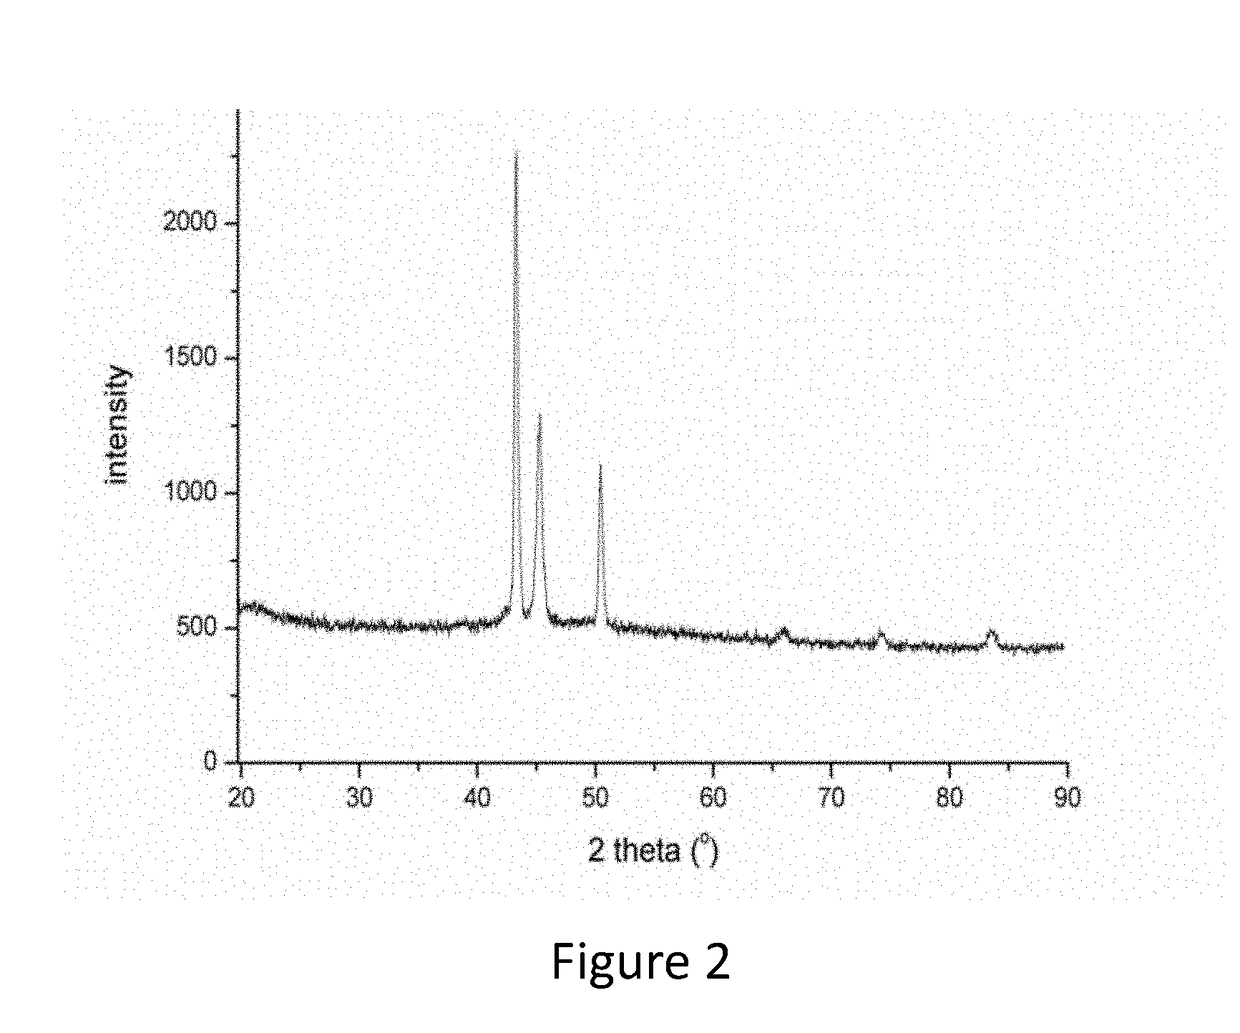 Process for Forming a Cobalt-Iron Alloy Film on a Substrate